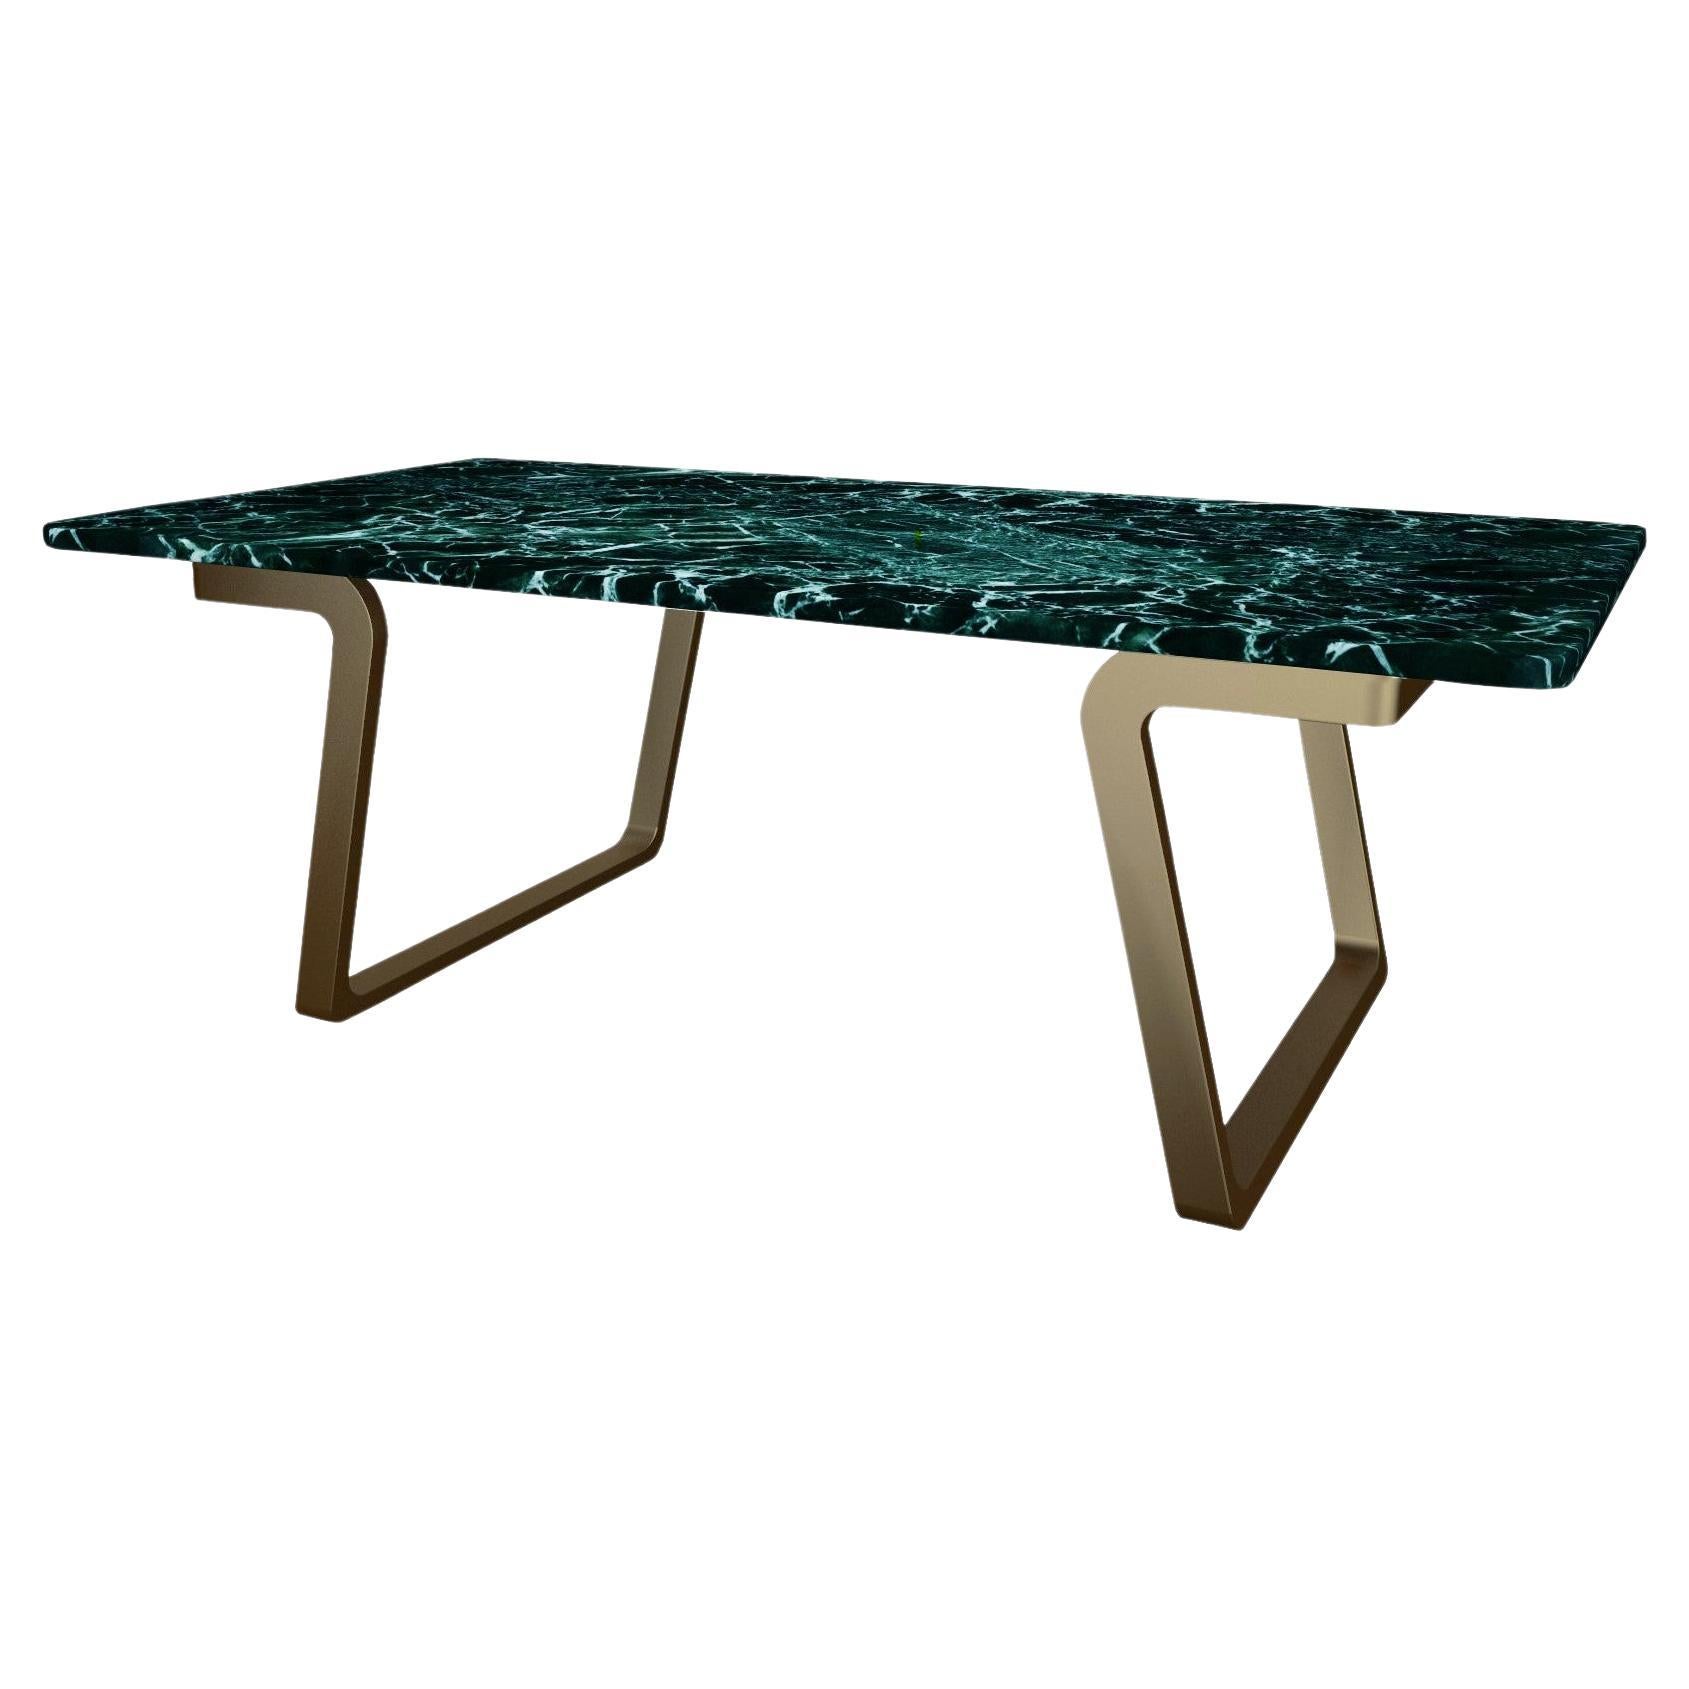 NORDST JERRY Coffee Table, Italian Green Lightning Marble, Danish Modern Design For Sale